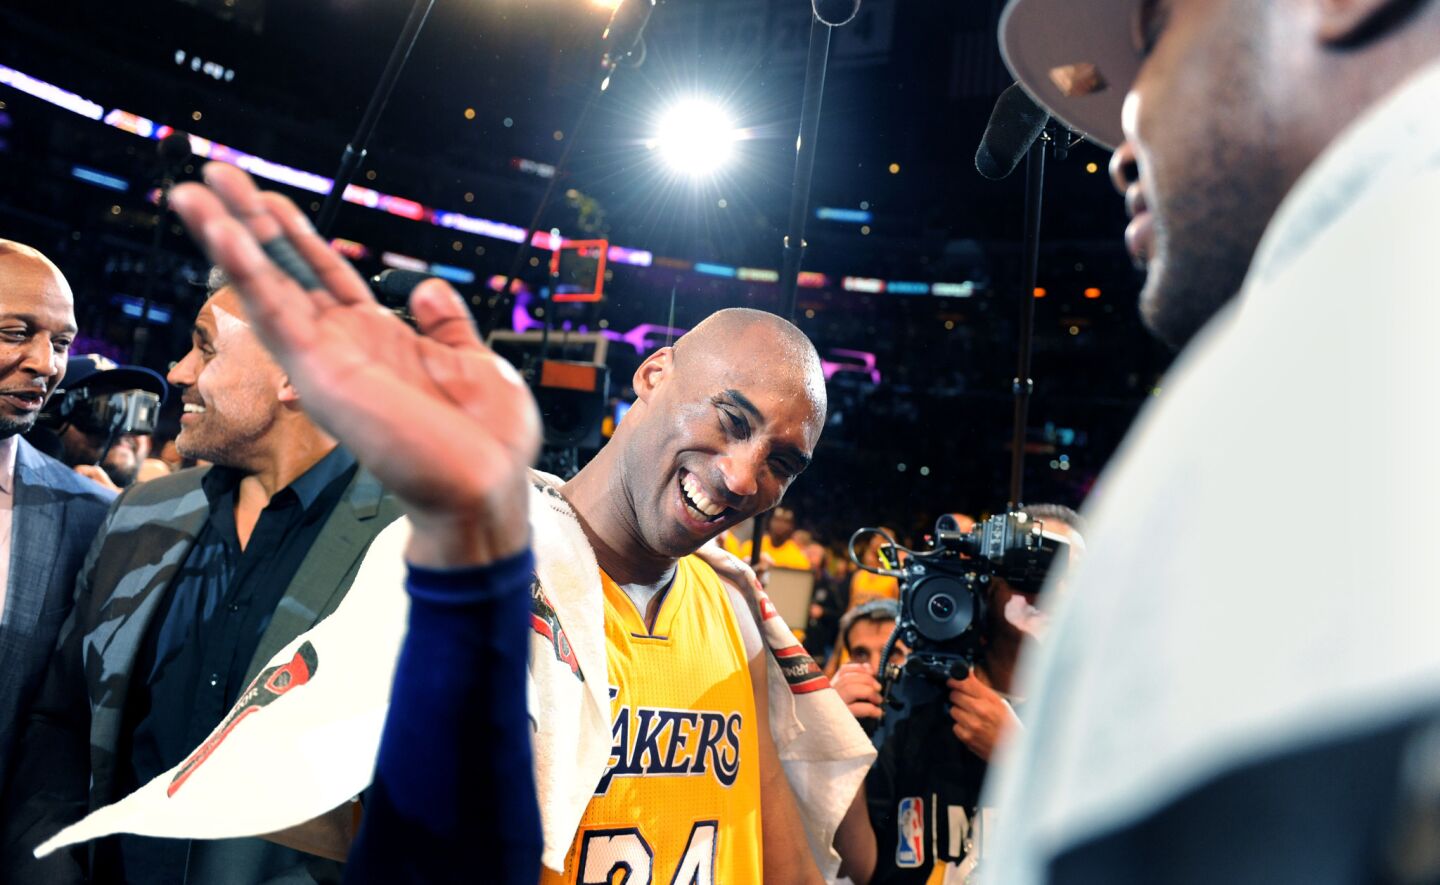 Kobe Bryant greets Lamar Odom after his final game at Staples Center.